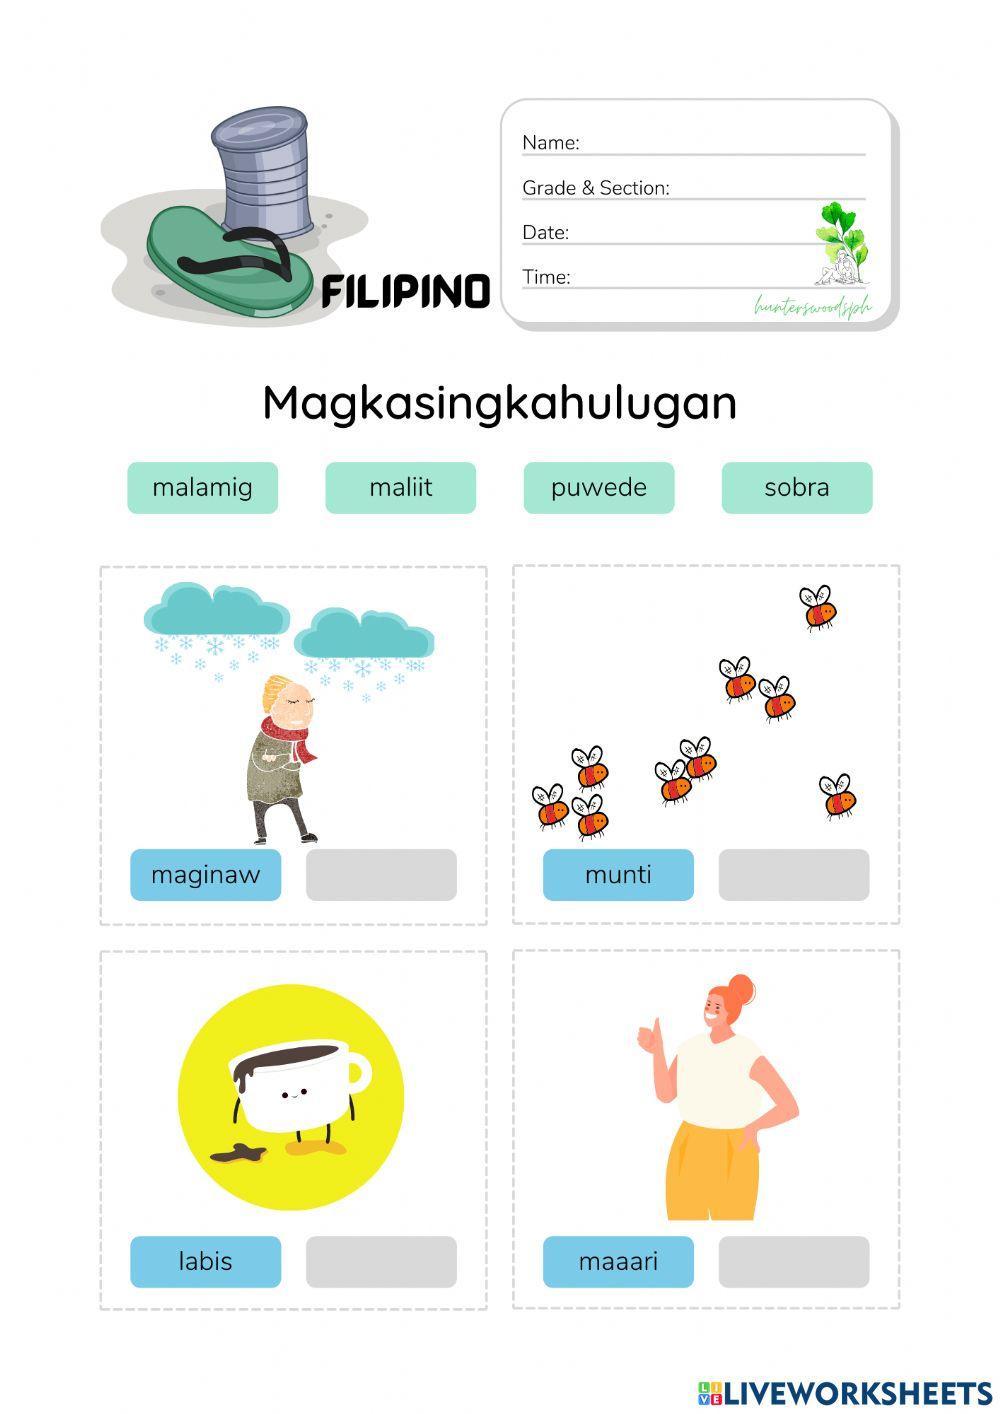 Magkasingkahulugan with Pictures (HuntersWoodsPH Filipino)